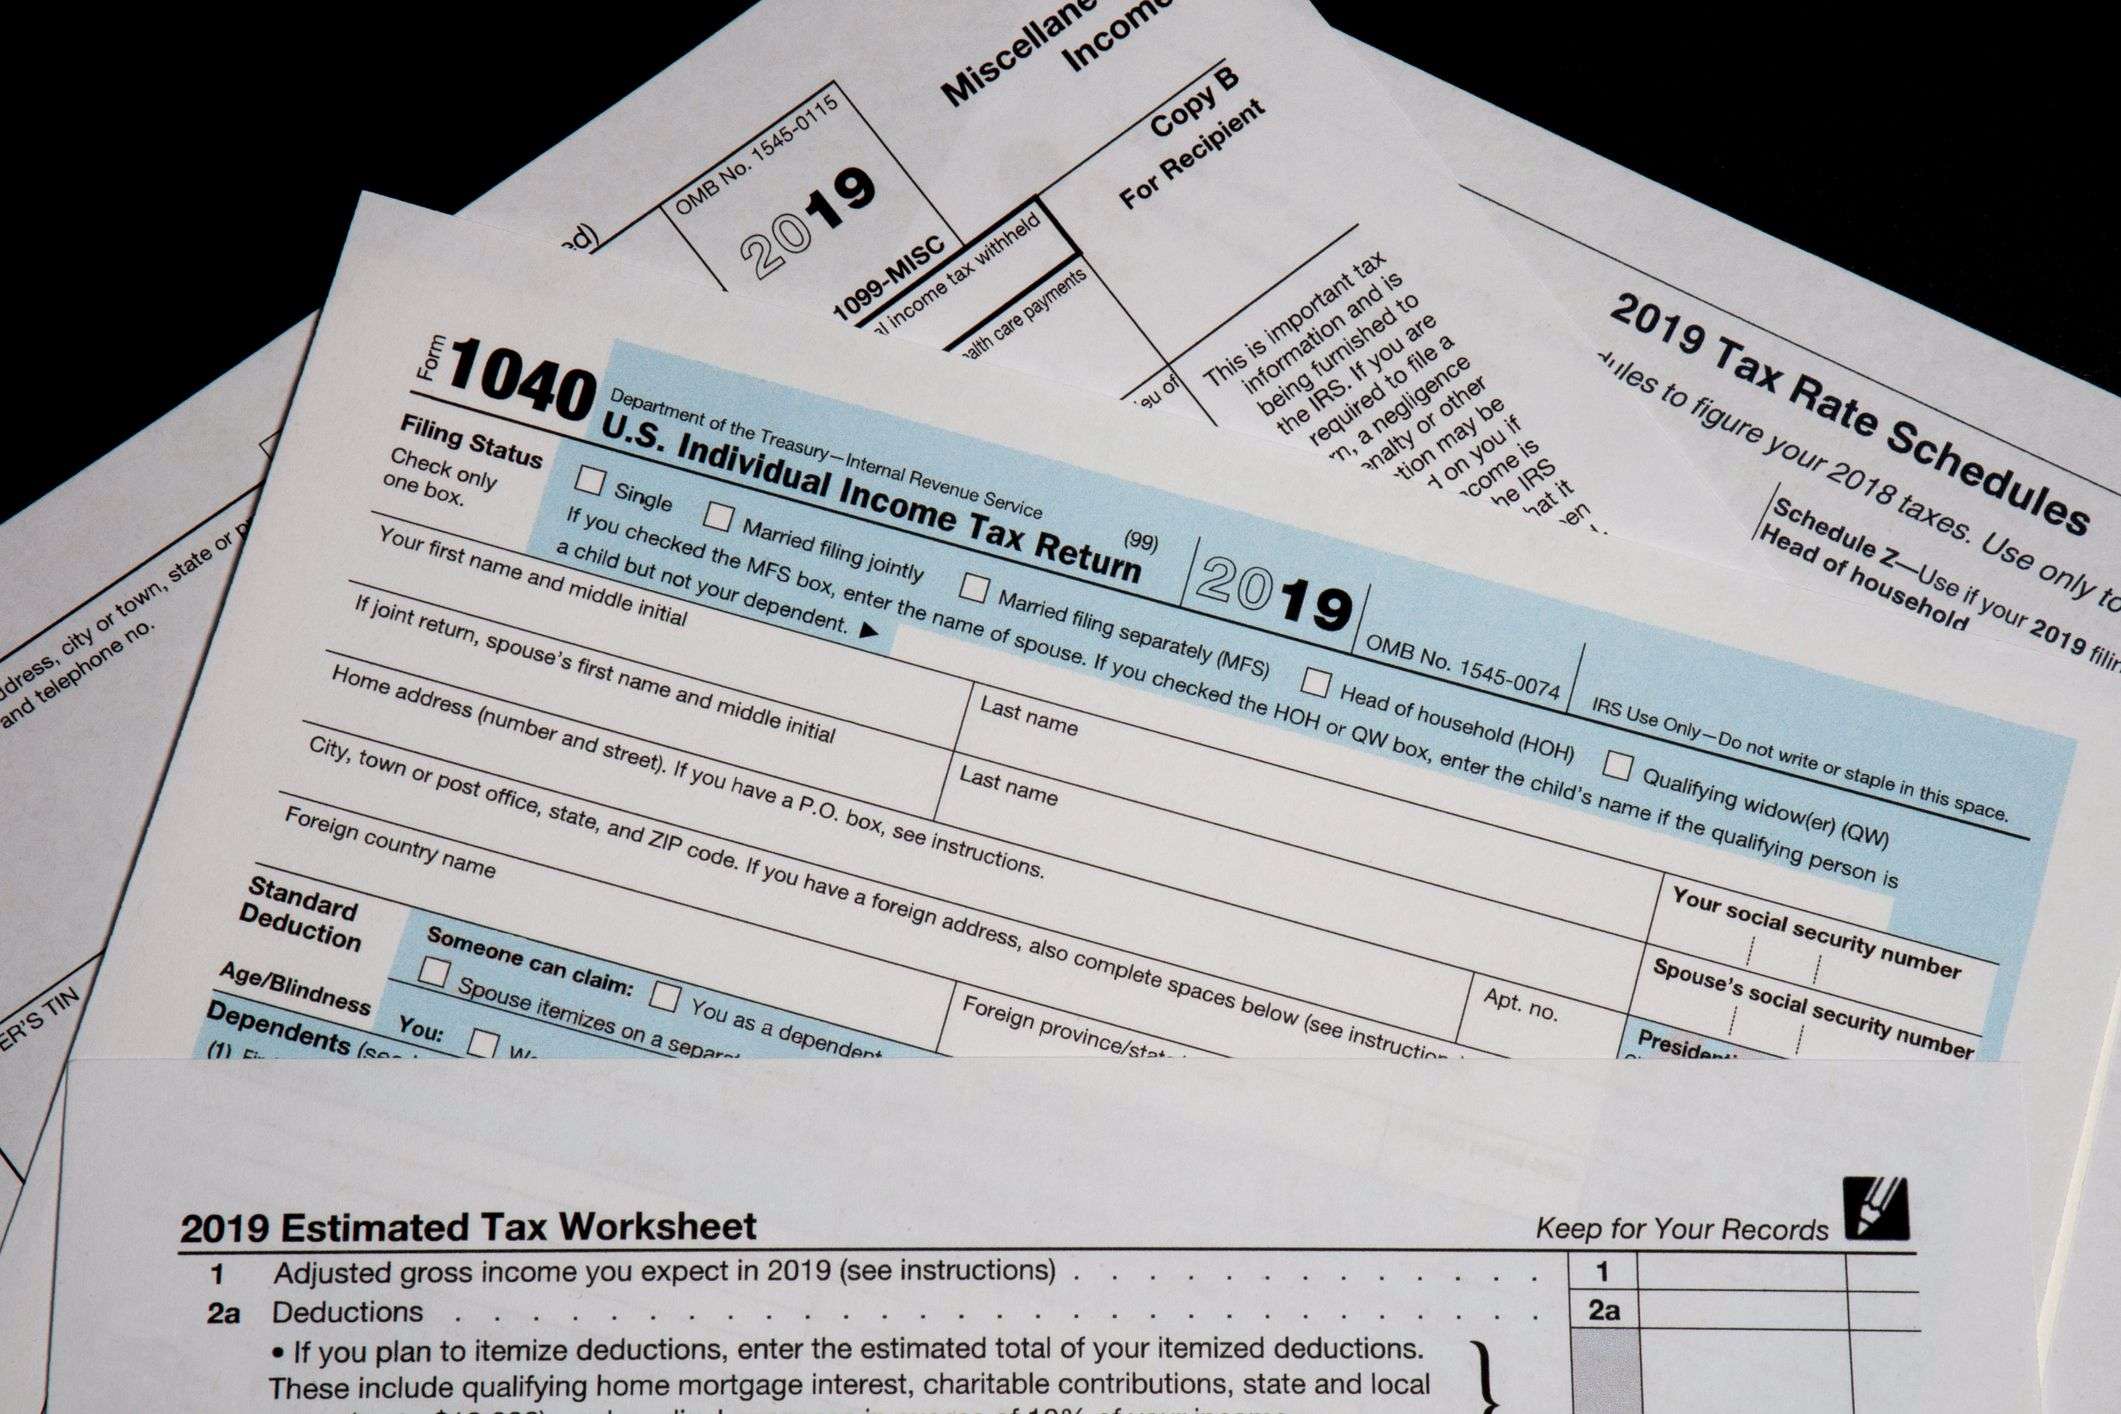 Where to Mail Tax Documents to the IRS